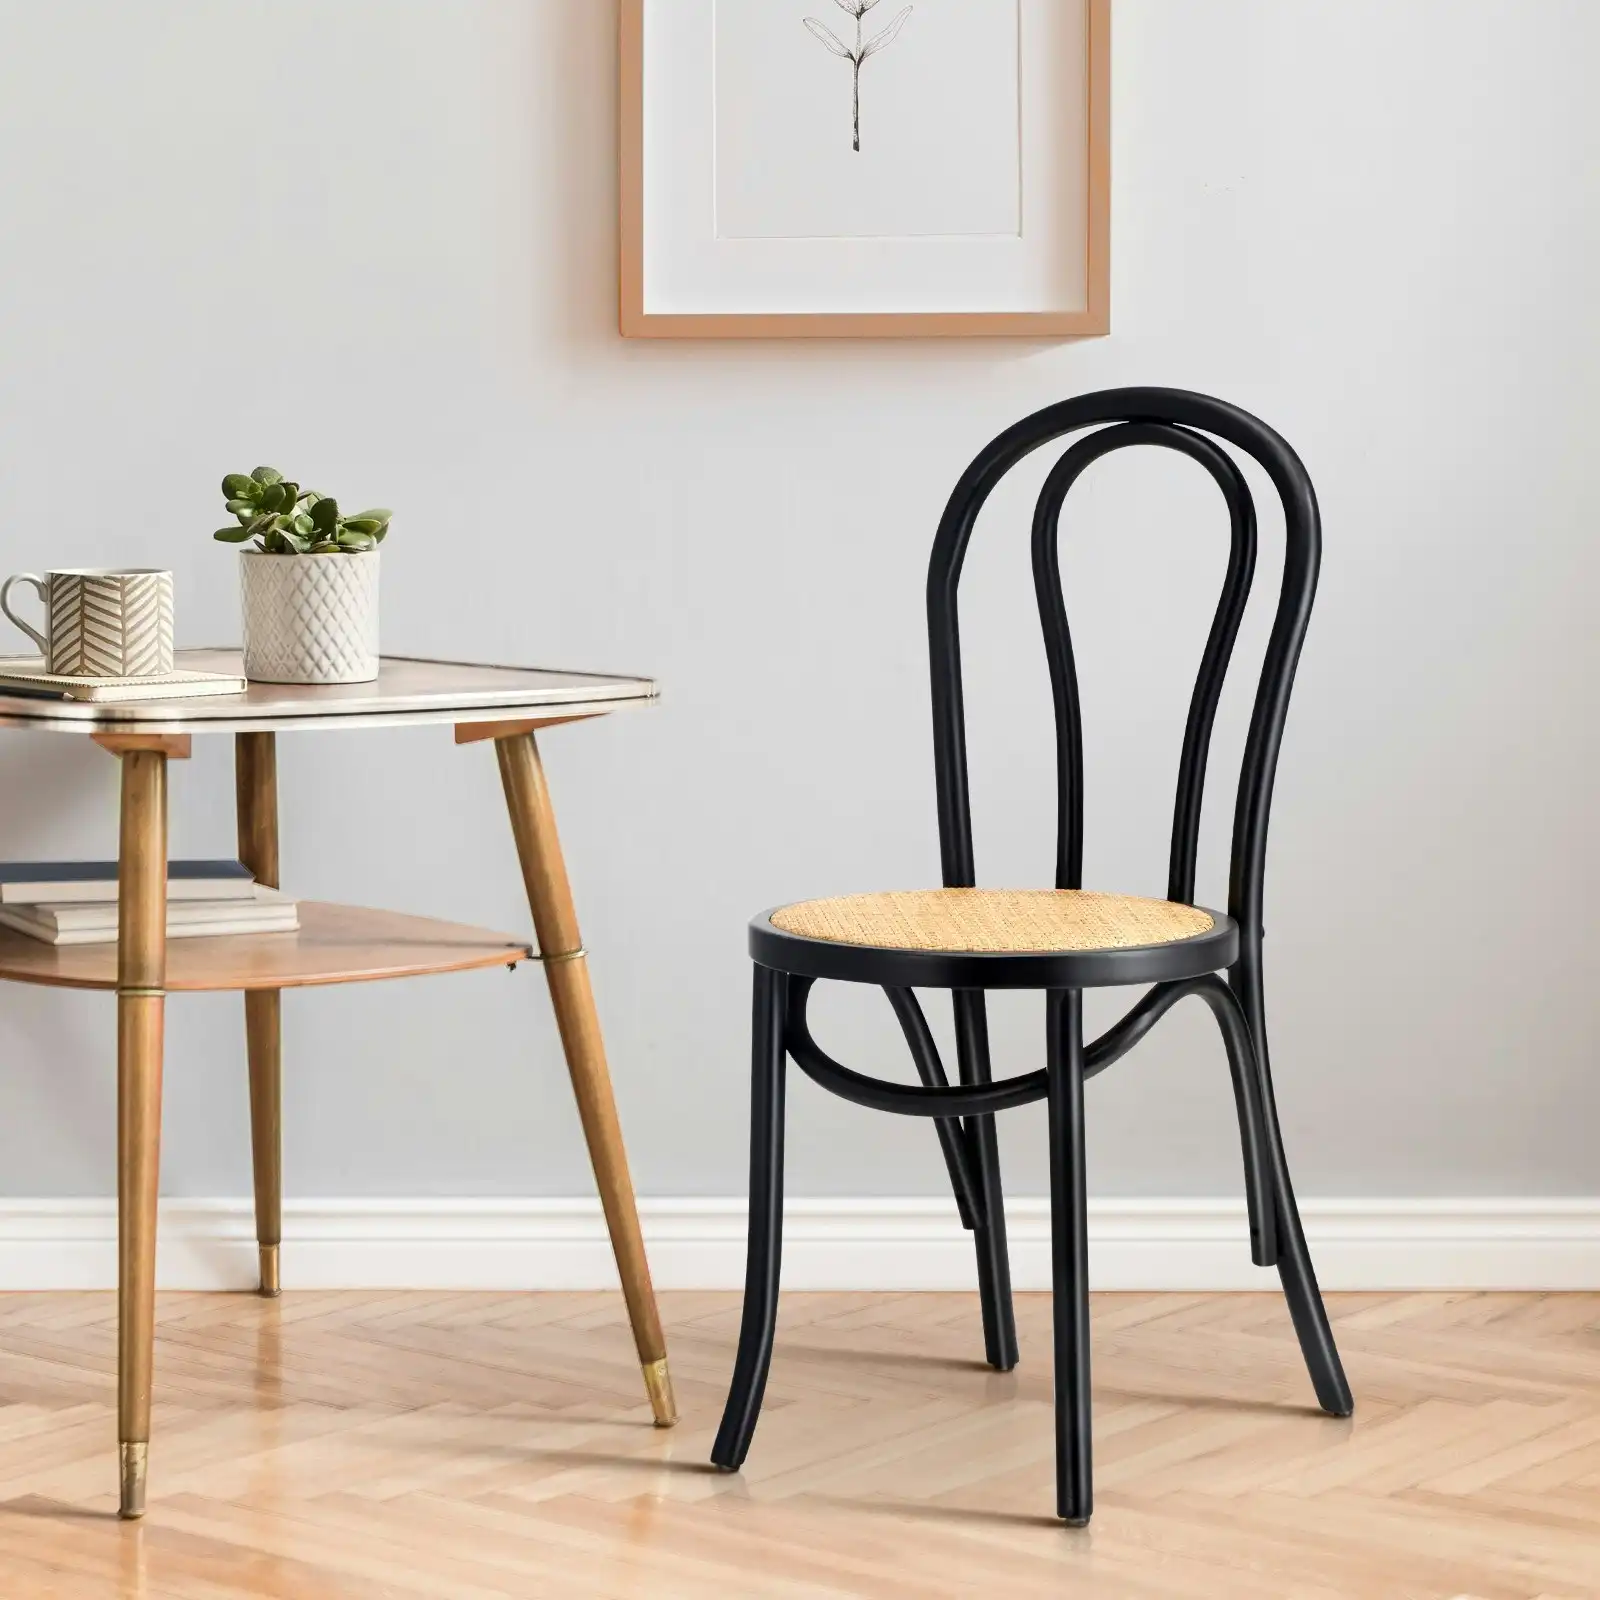 Oikiture Dining Chair Solid Wooden Chairs Ratan Seat Black